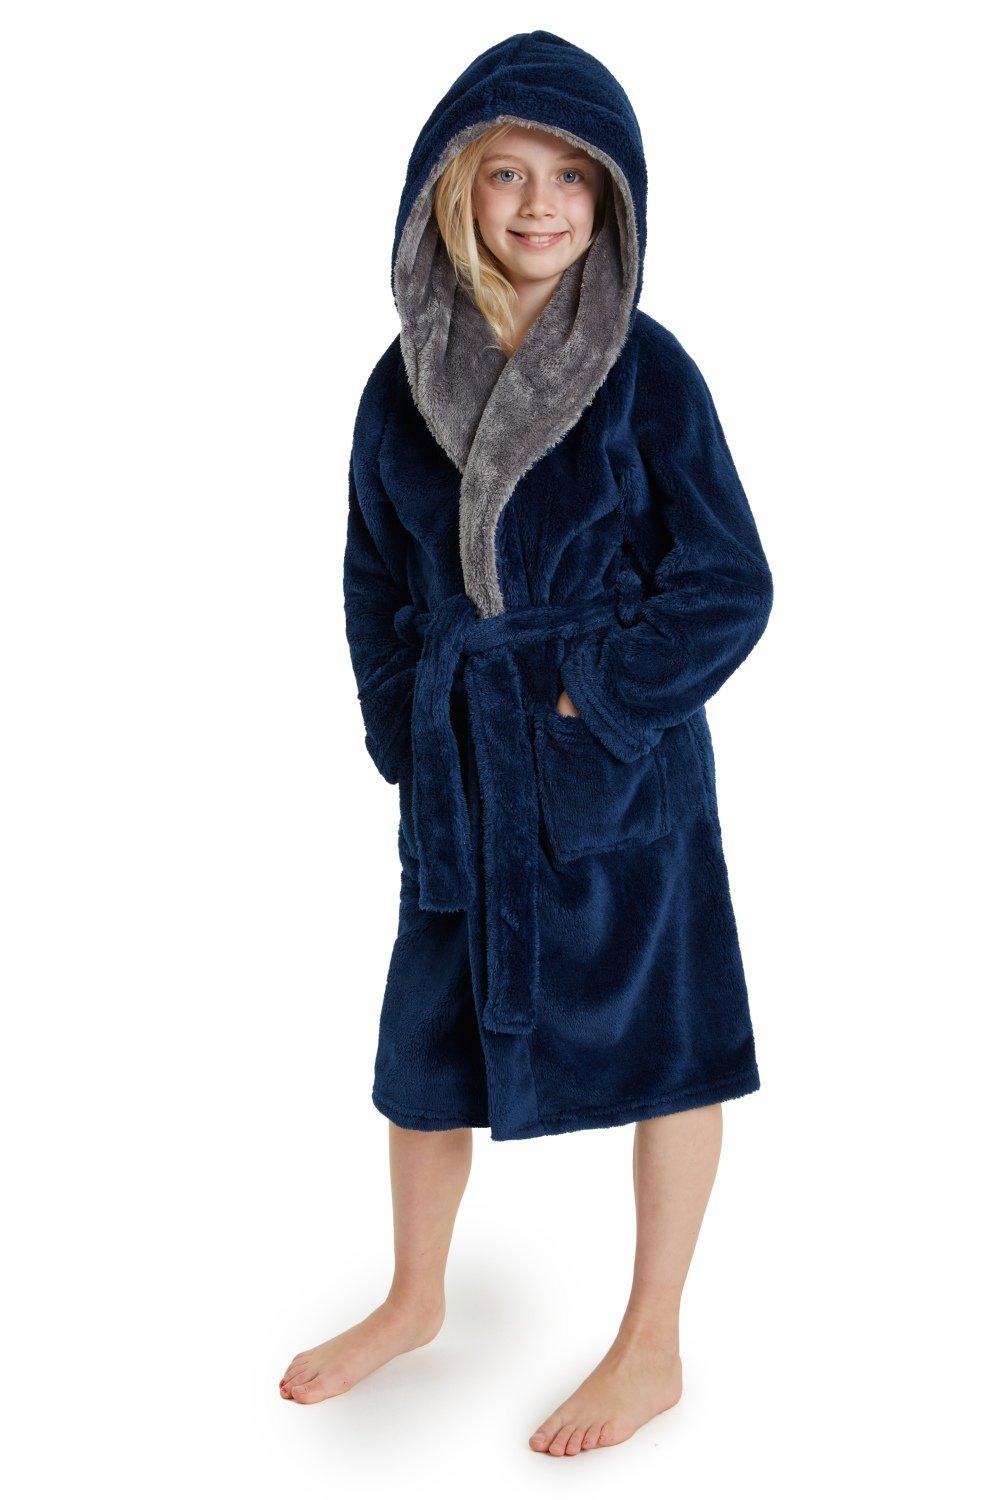 Buy V.&GRIN Boys Fleece Bathrobe, Hooded Toddler Robe Soft Night Dressing  Gown Sleepwear for Boys（Olive Green 10T） Online at Low Prices in India -  Amazon.in